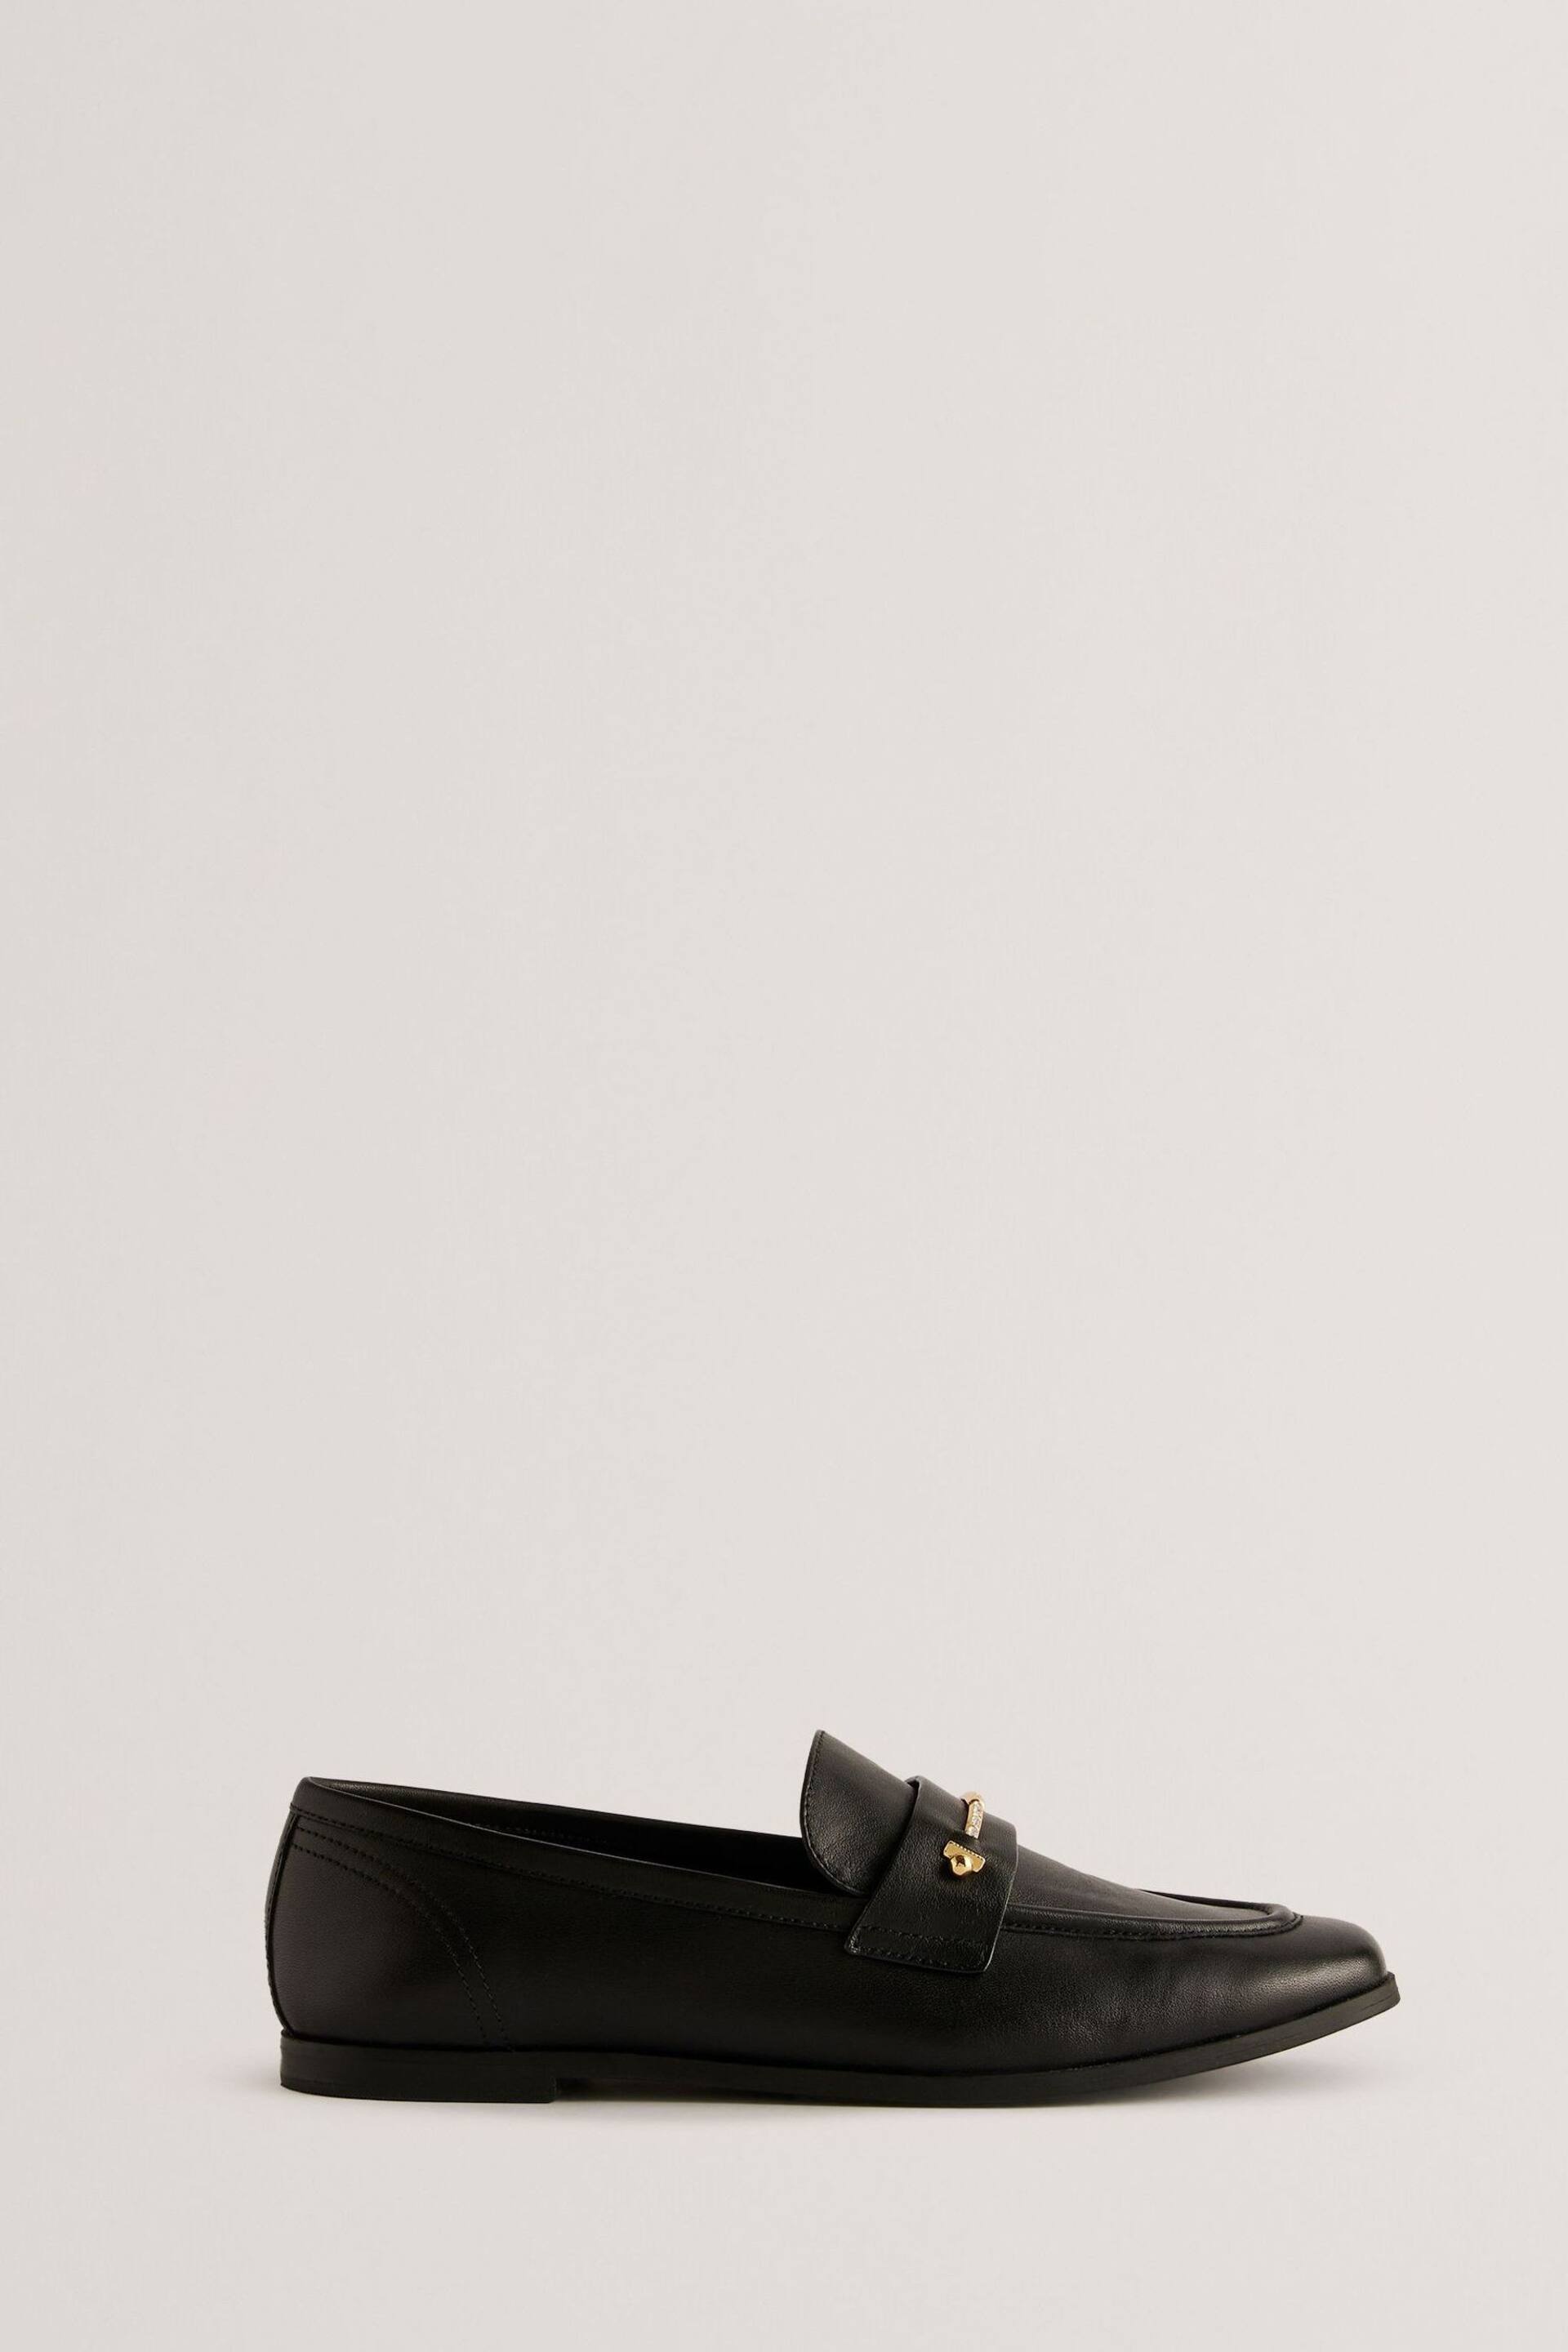 Ted Baker Black Zoee Flat Loafers With Signature Bar - Image 1 of 5